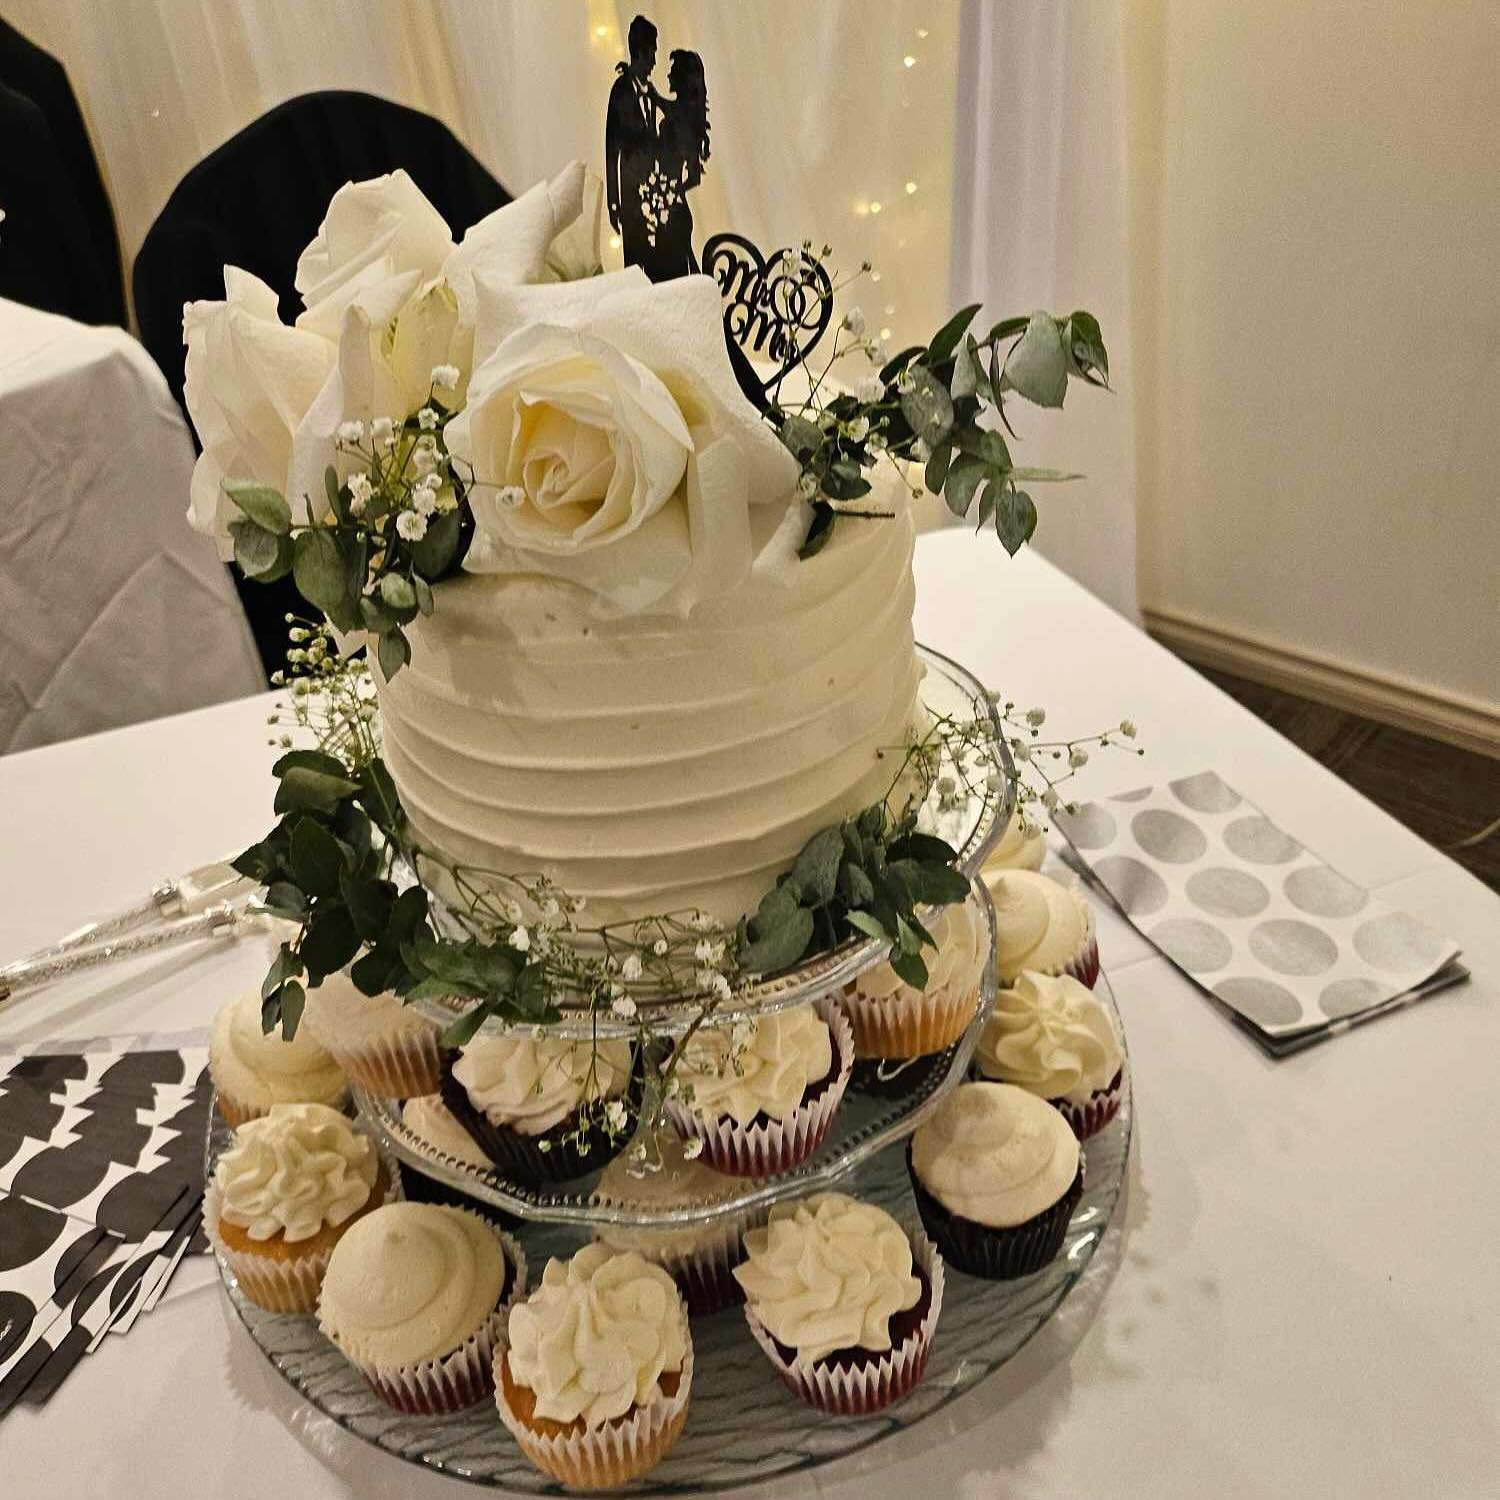 We are absolutely loving this display of cupcakes and triple layer cake for a wedding! Both Vegan &amp; Gluten free 😊
Congratulations Melanie to you and your partner💍❤️
Thanks for supporting our small business 

Have an event coming up? Contact us 